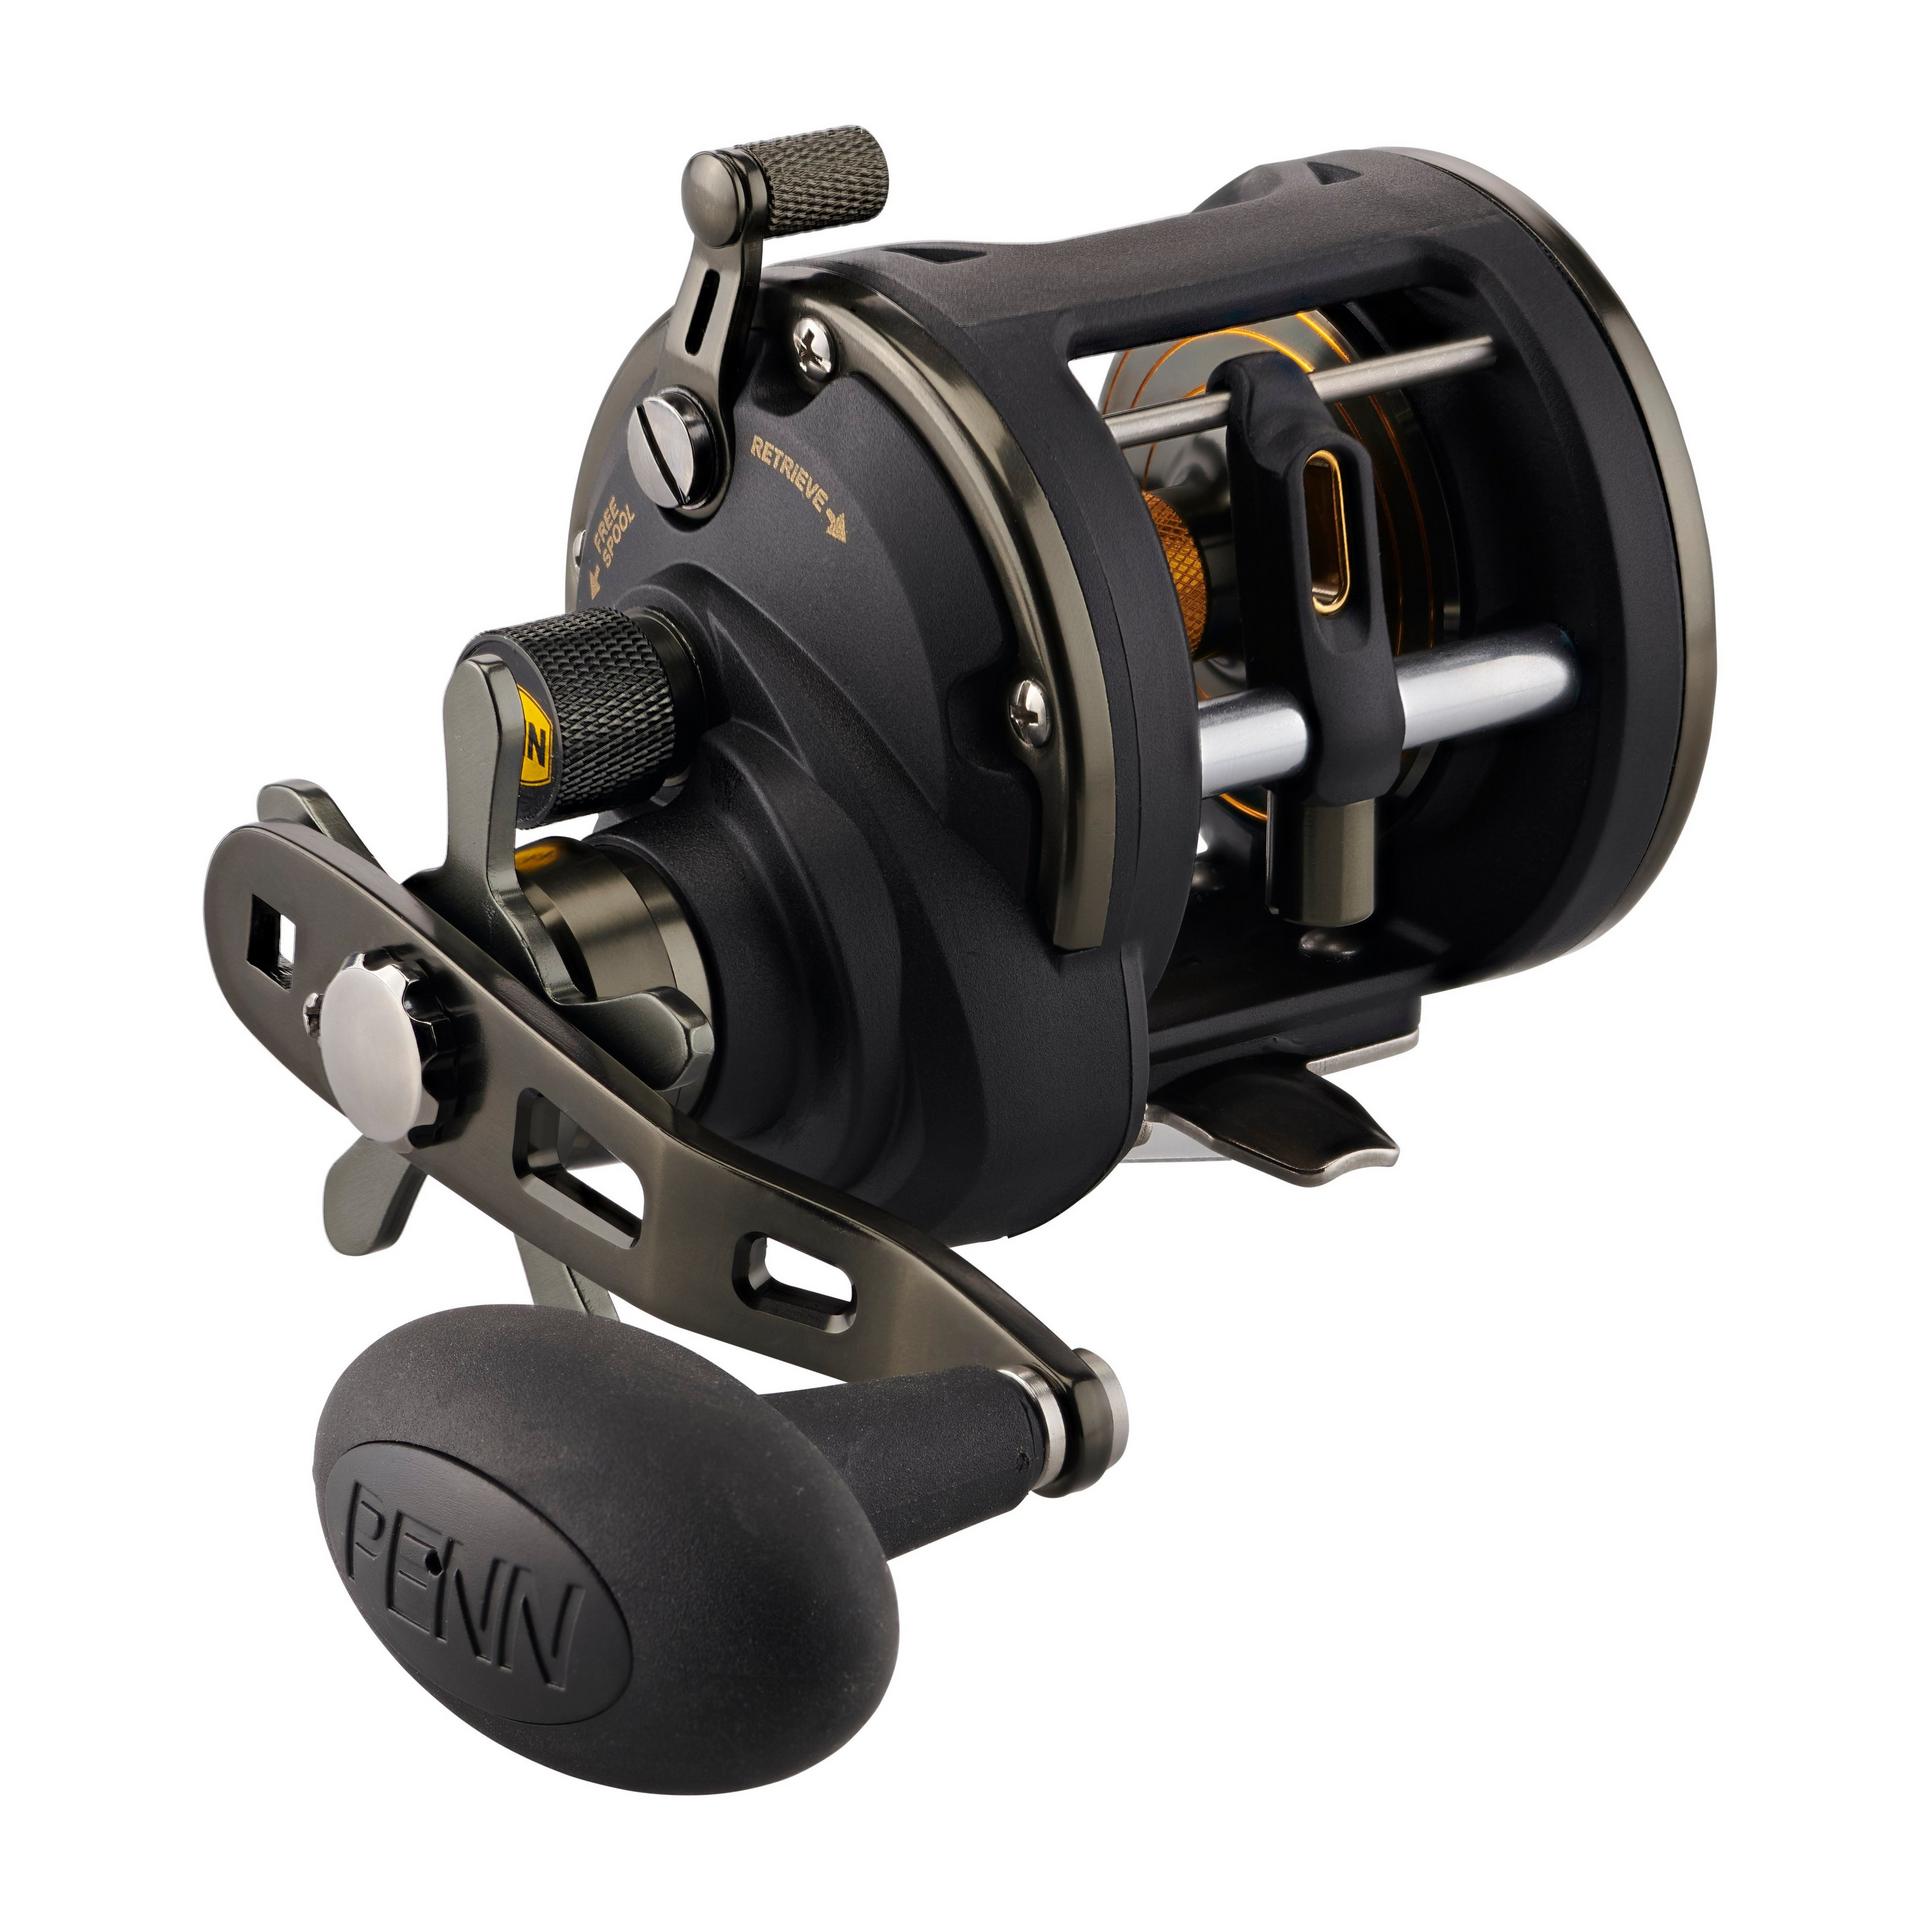 What are some brands of fishing reels that can last more than ten